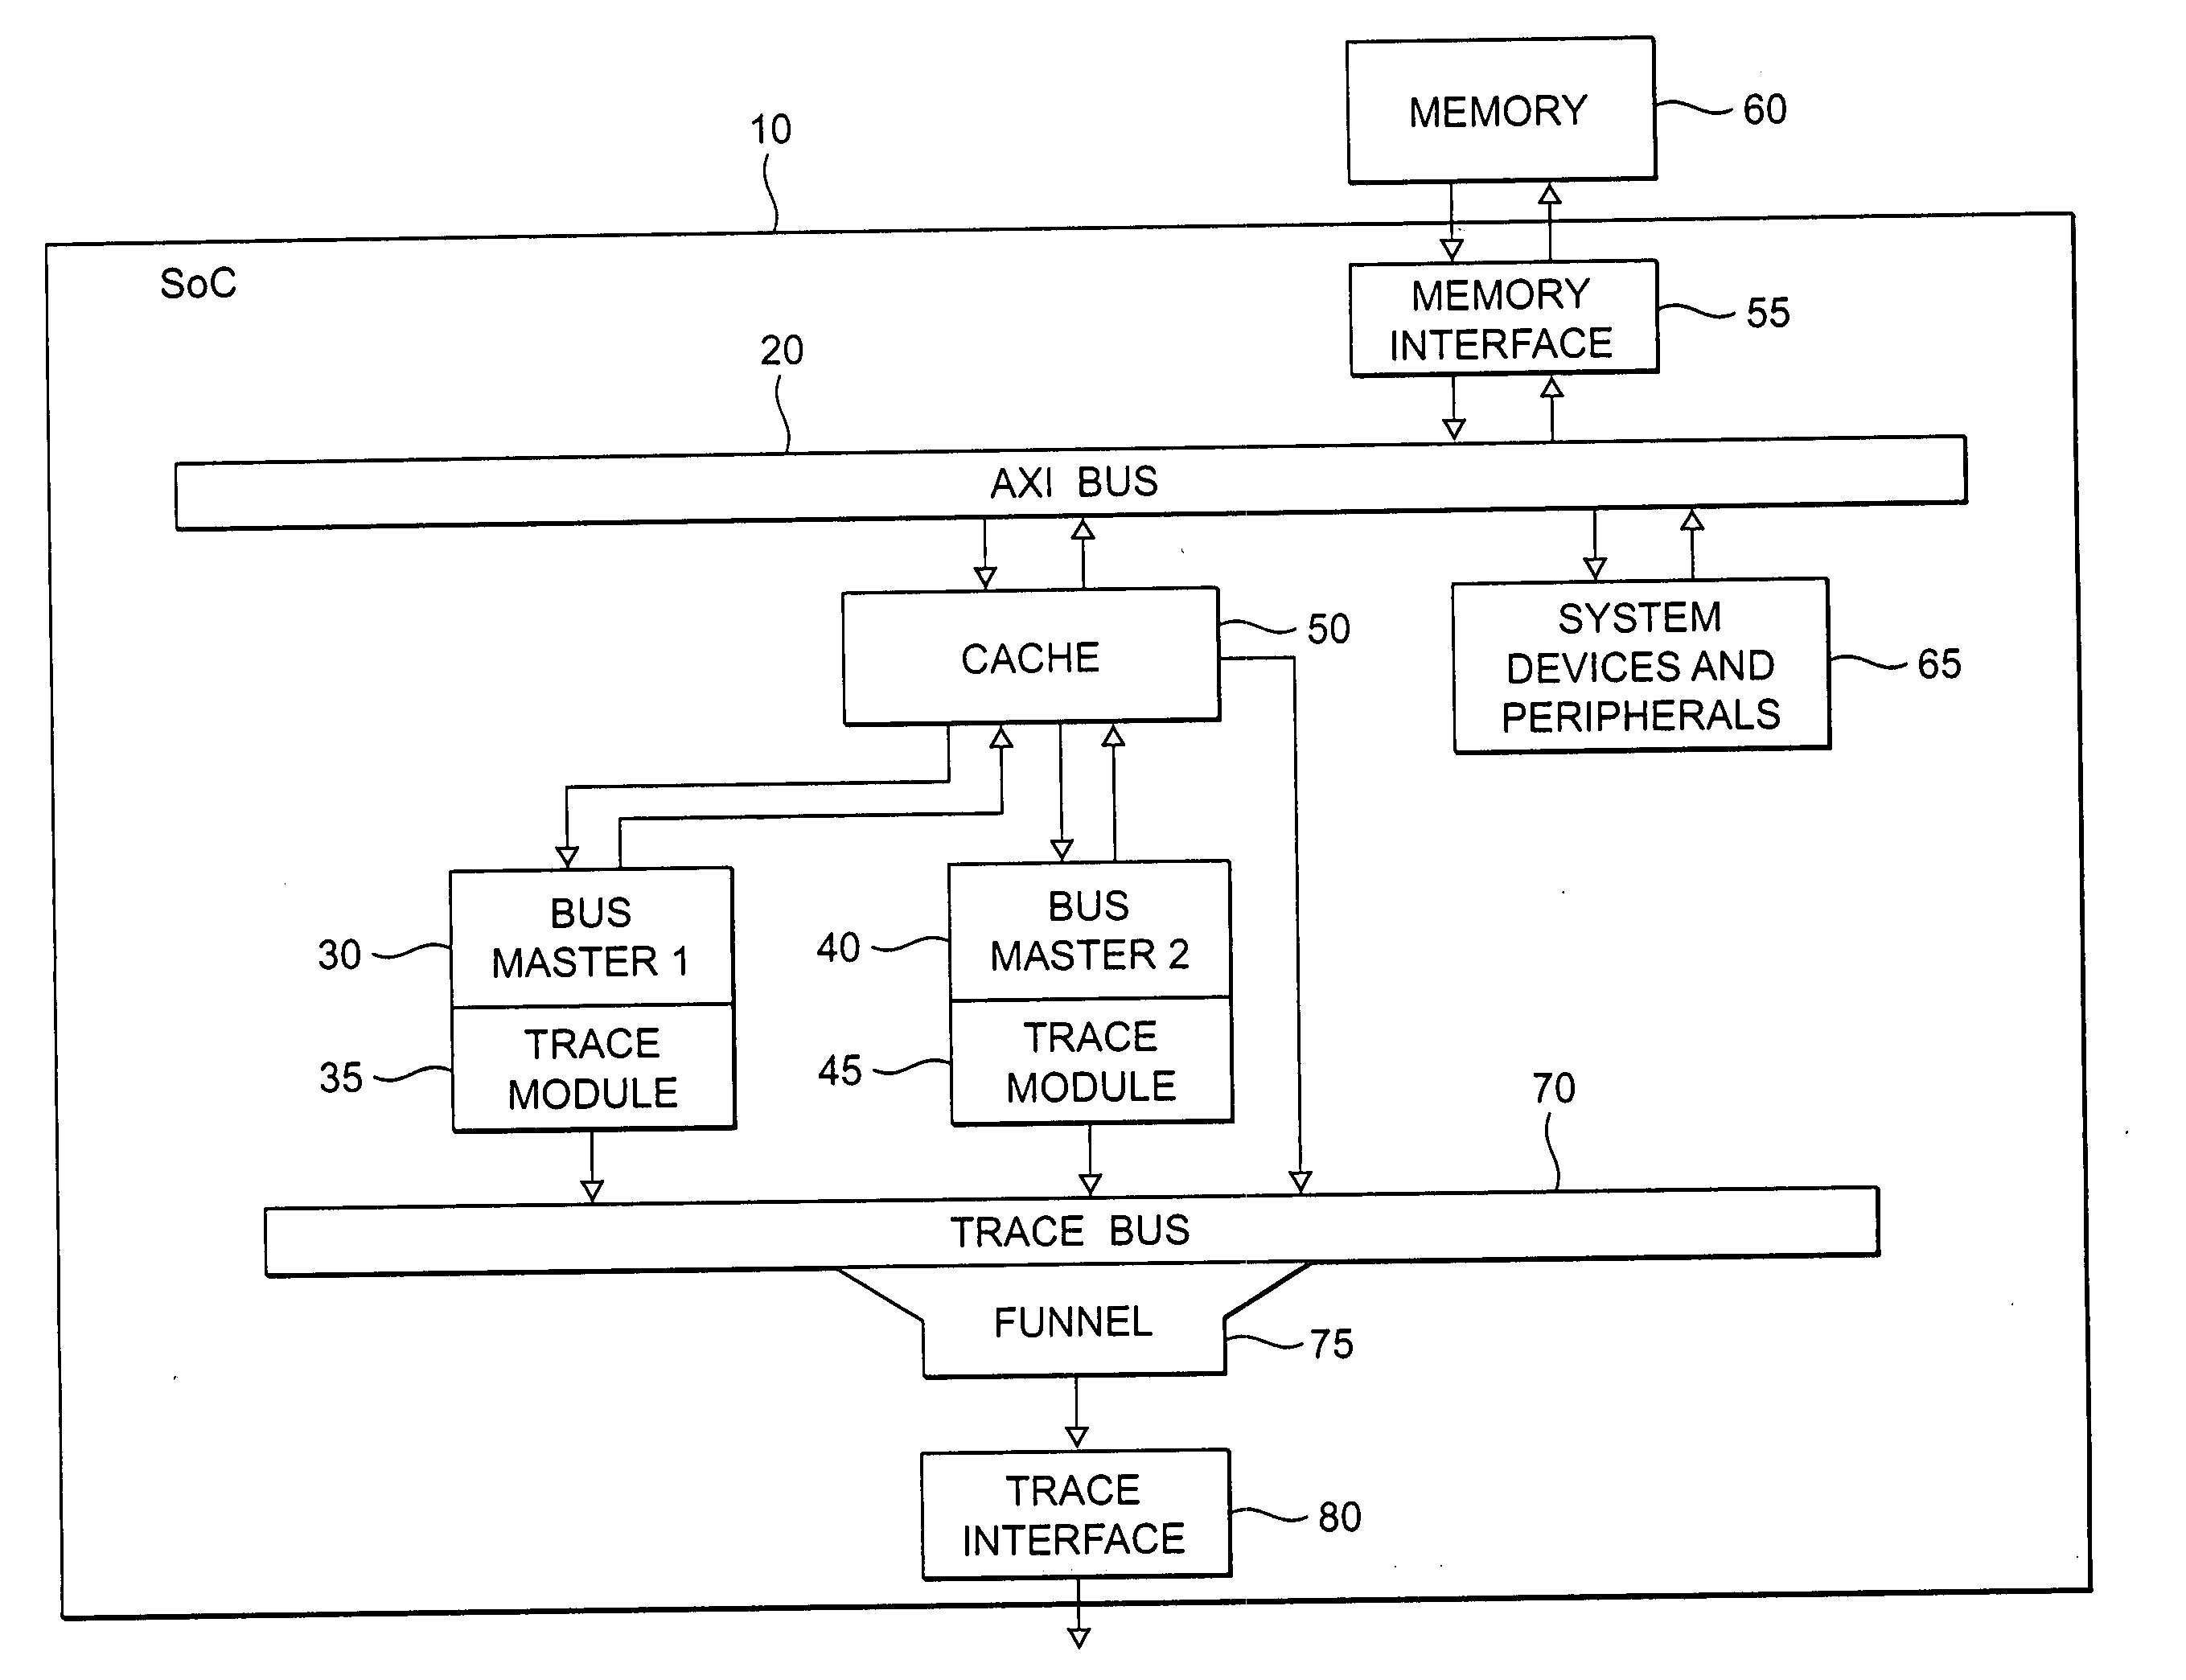 Storage of trace data within a data processing apparatus